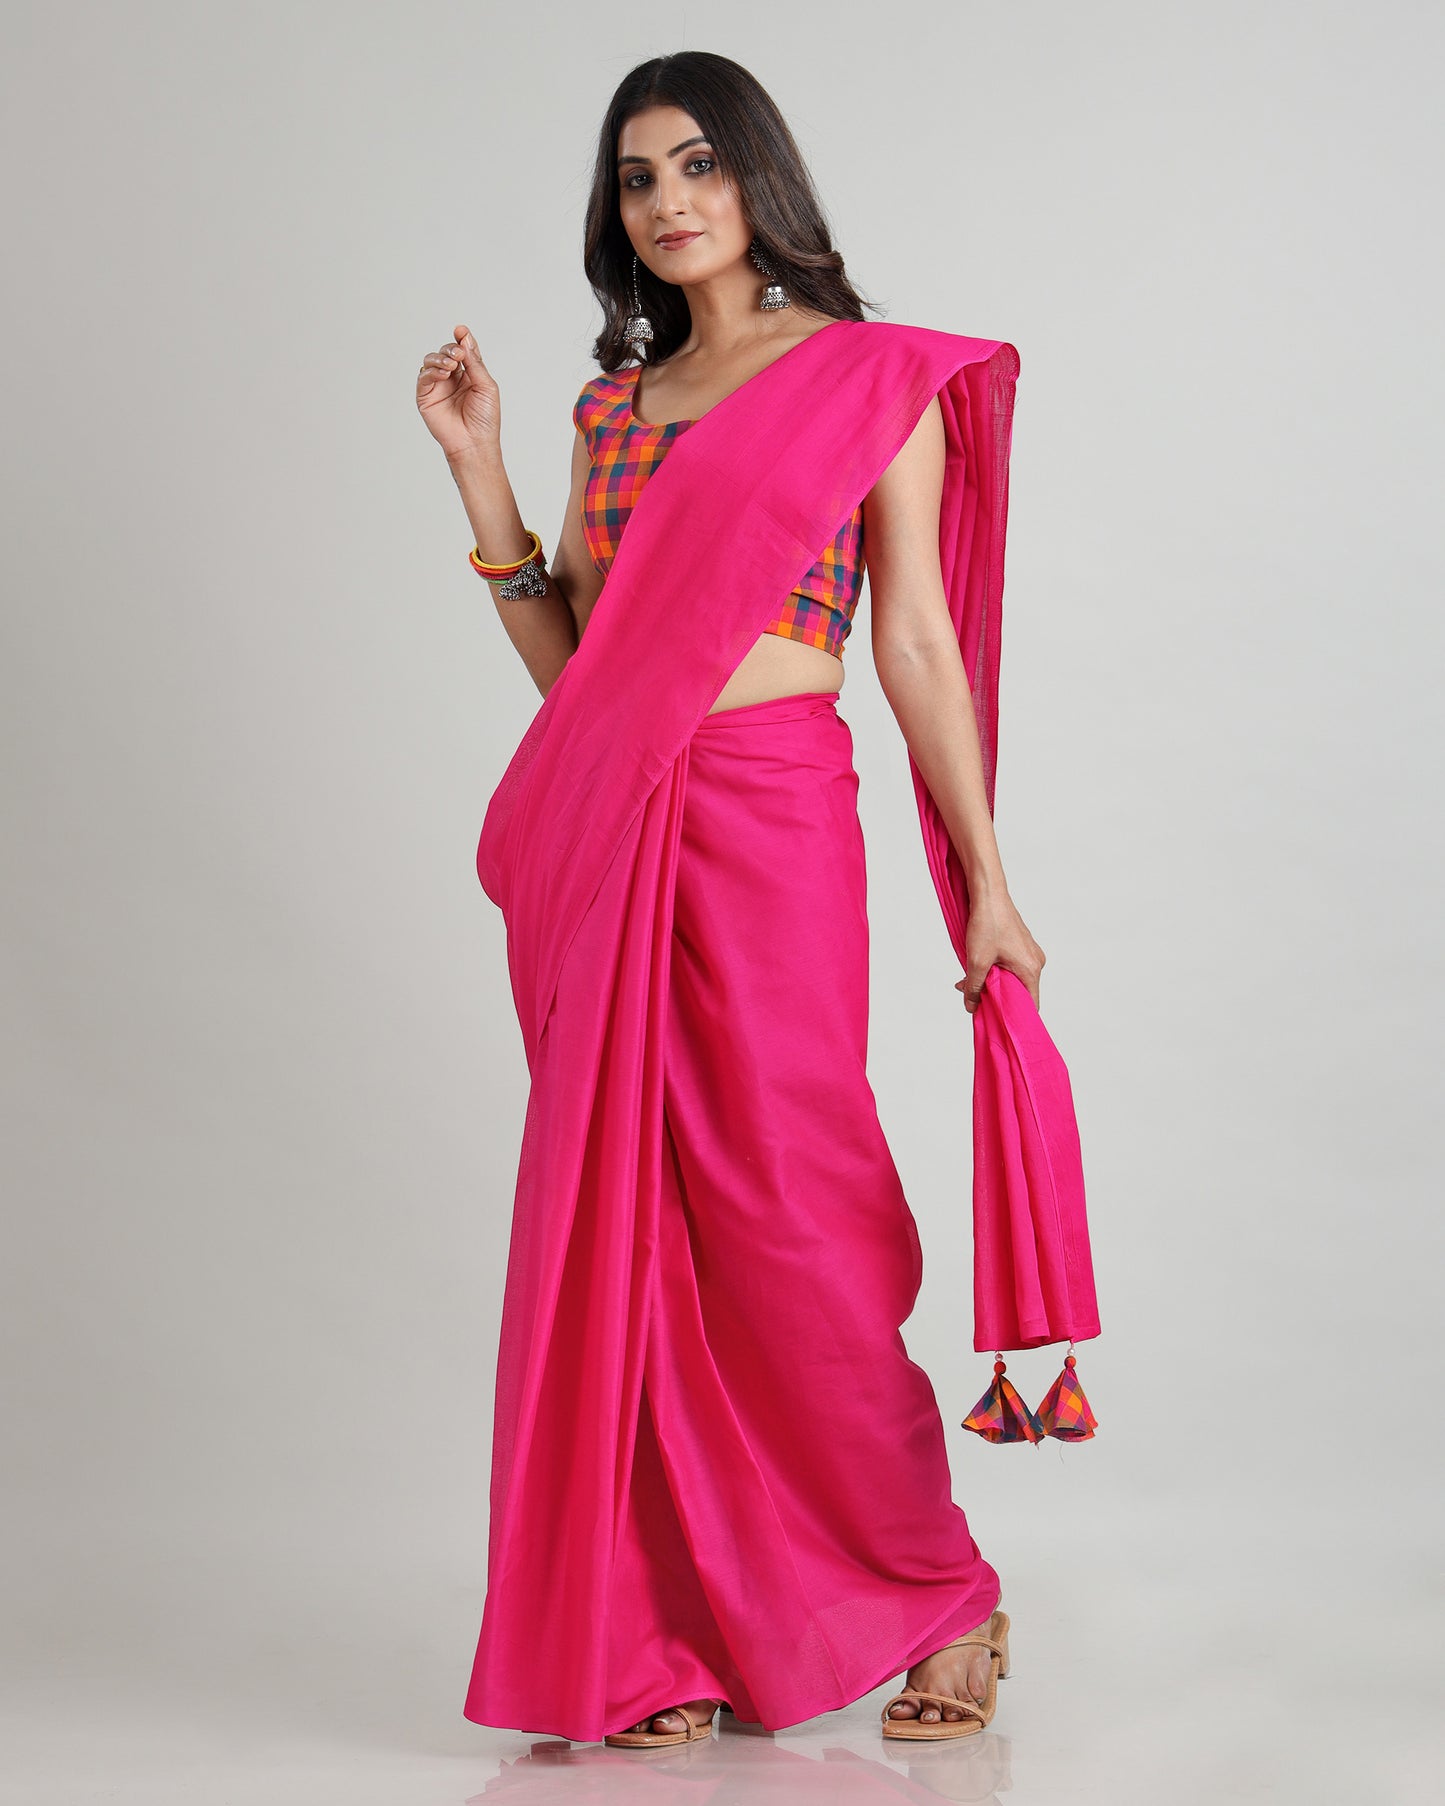 Breathe Easy, Look Bold : The Pink Cotton Mulmul Saree